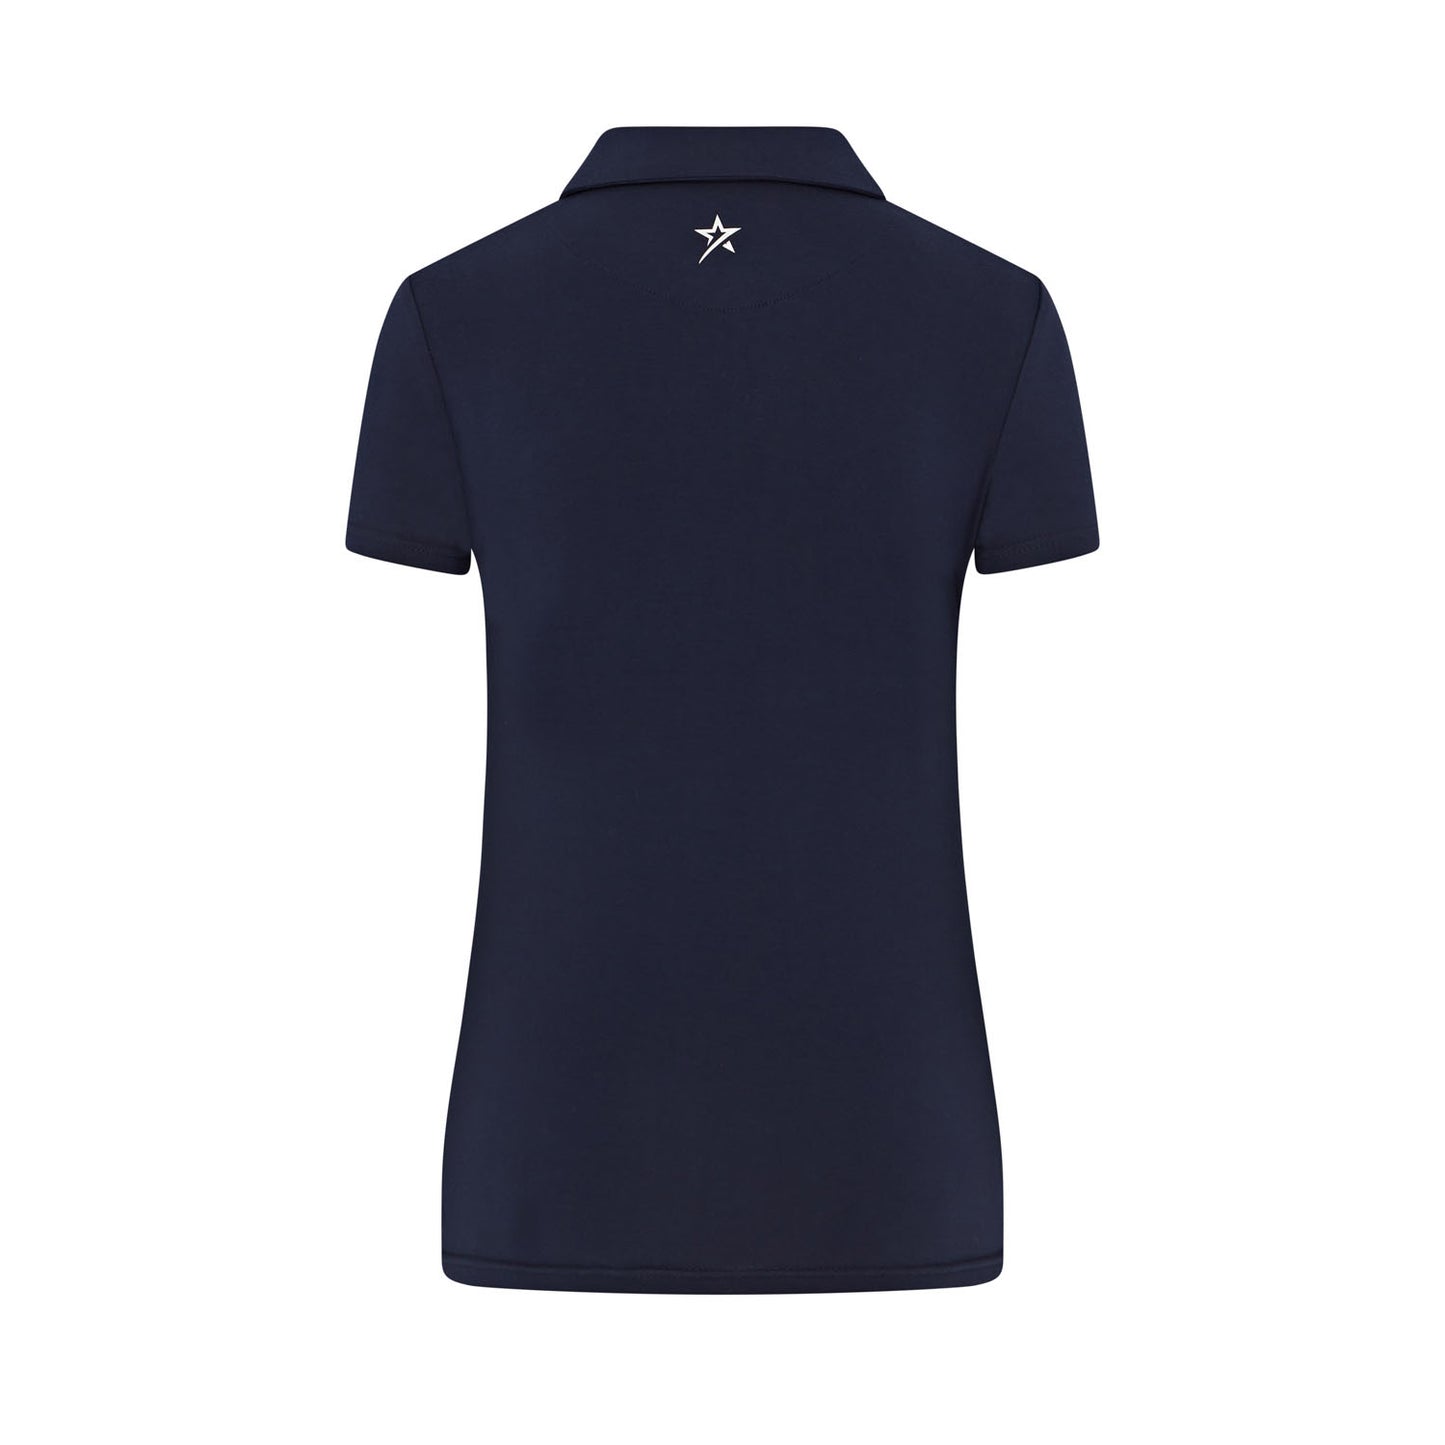 Swing Out Sister Ladies Ultra-Soft Stretch Short Sleeve Polo in Navy Blazer